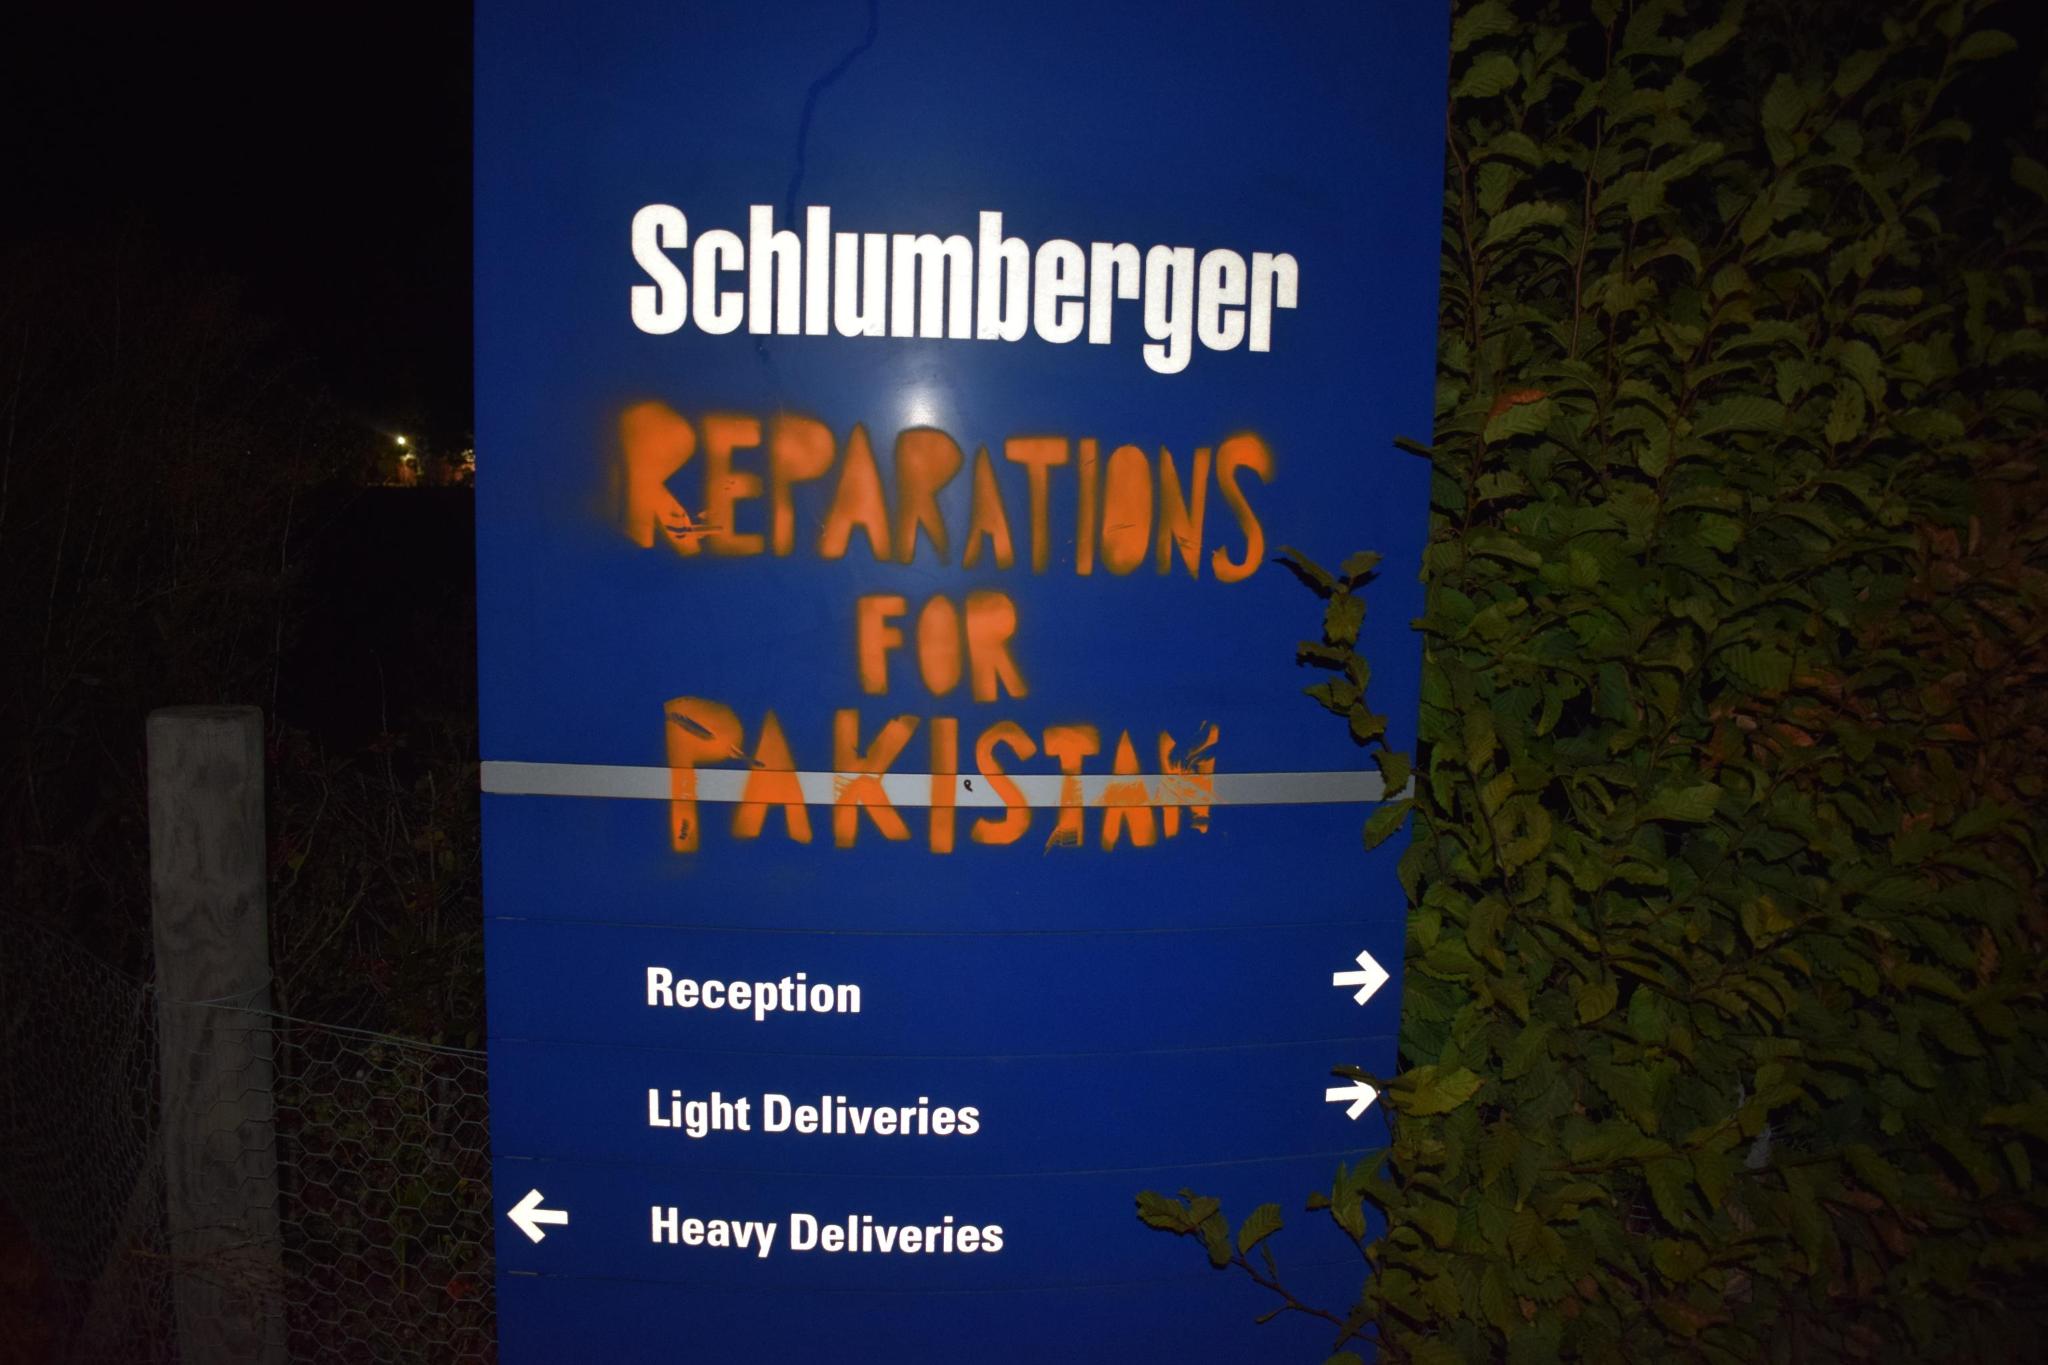 "Reparations for Pakistan" has been spray painted on the oil company Schlumberger's sign at the University of Cambridge.